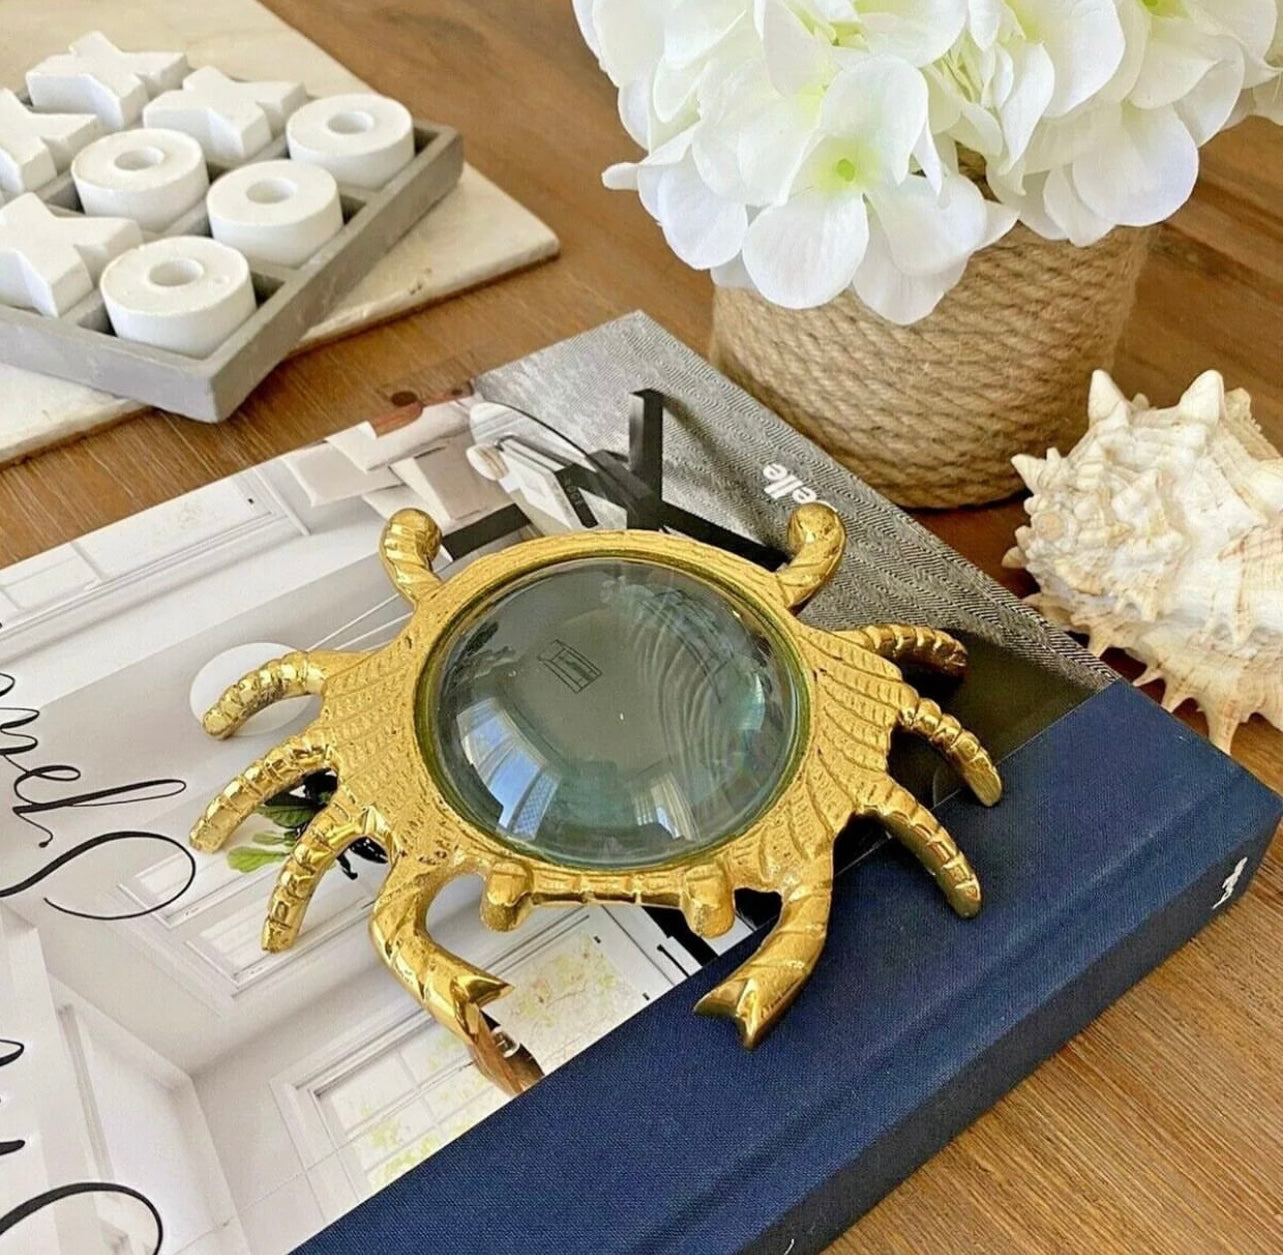 Crab Magnifying Coffee Table Ornament small